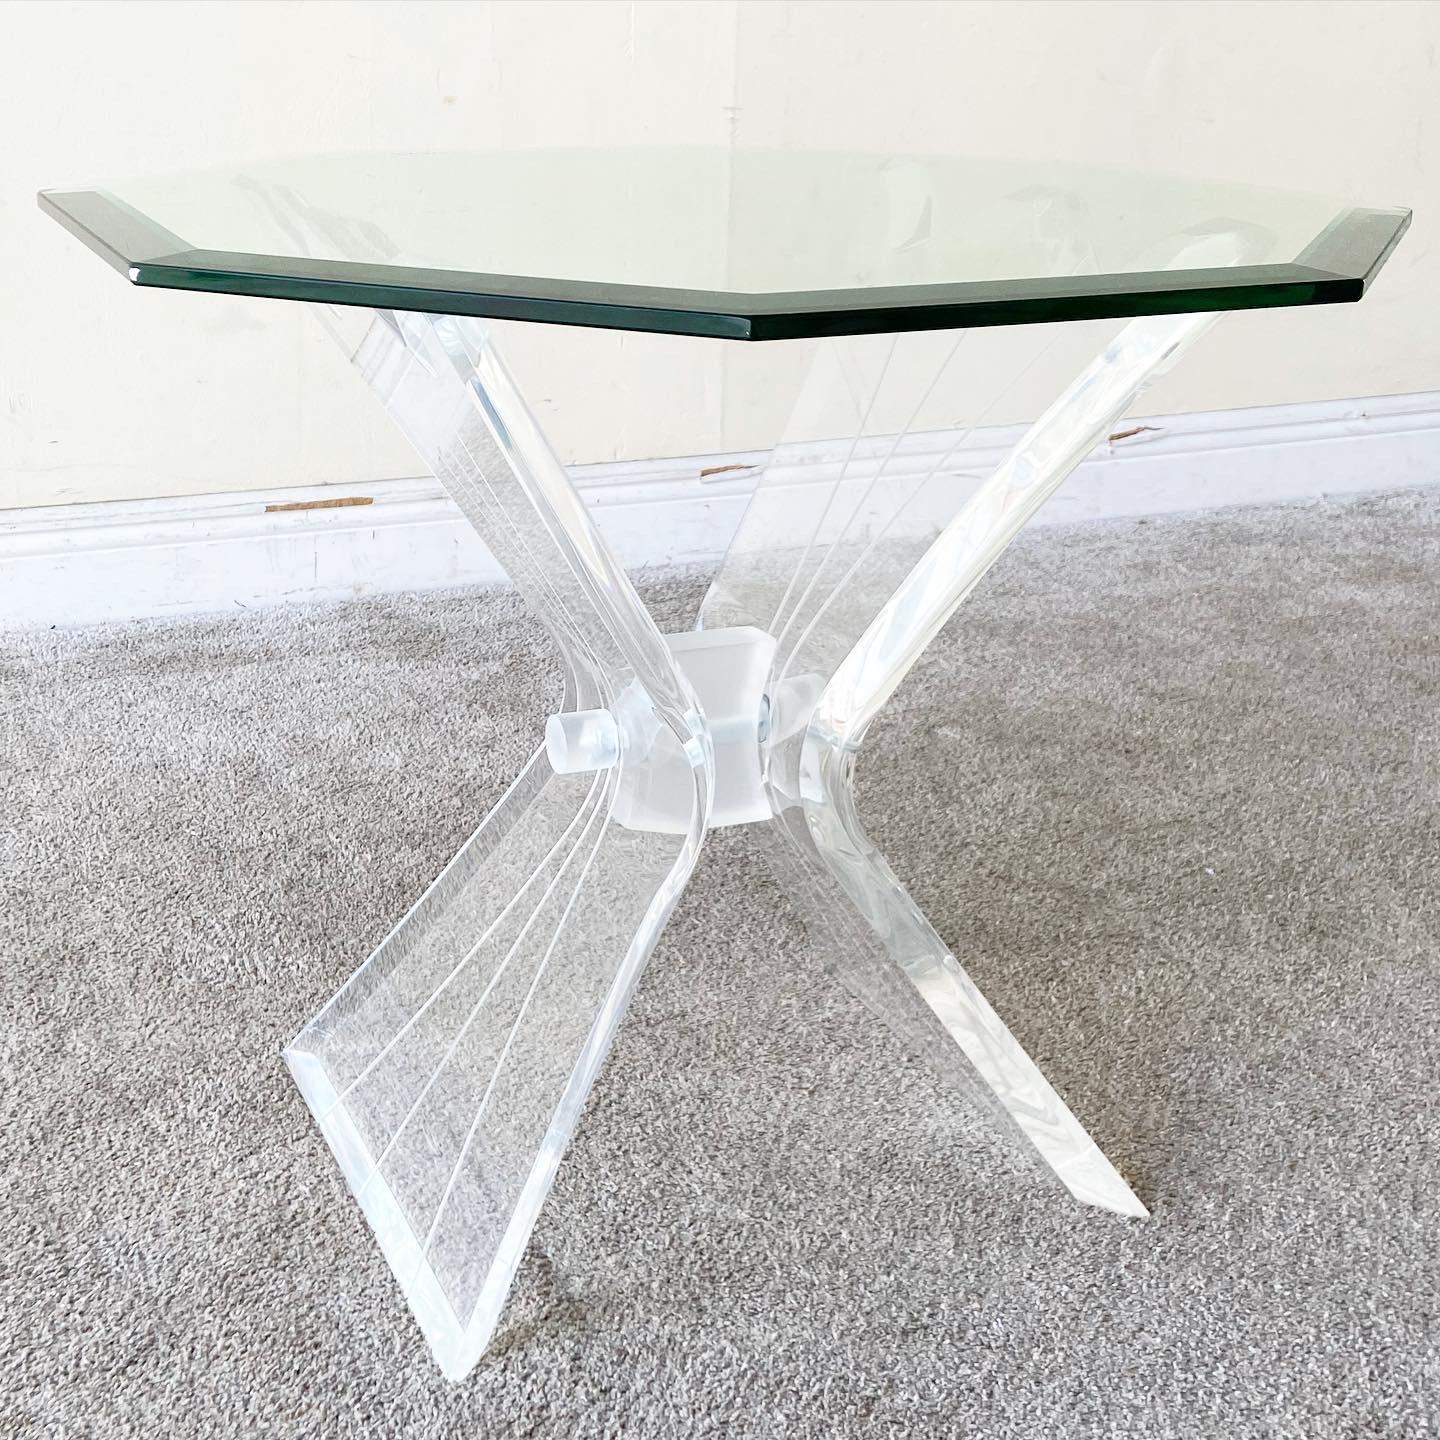 Amazing postmodern lucite side table. Features a beveled octagonal glass top.

Additional information:
Material: Glass, Lucite
Color: Transparent
Style: Postmodern
Time Period: 1980s
Dimension: 24